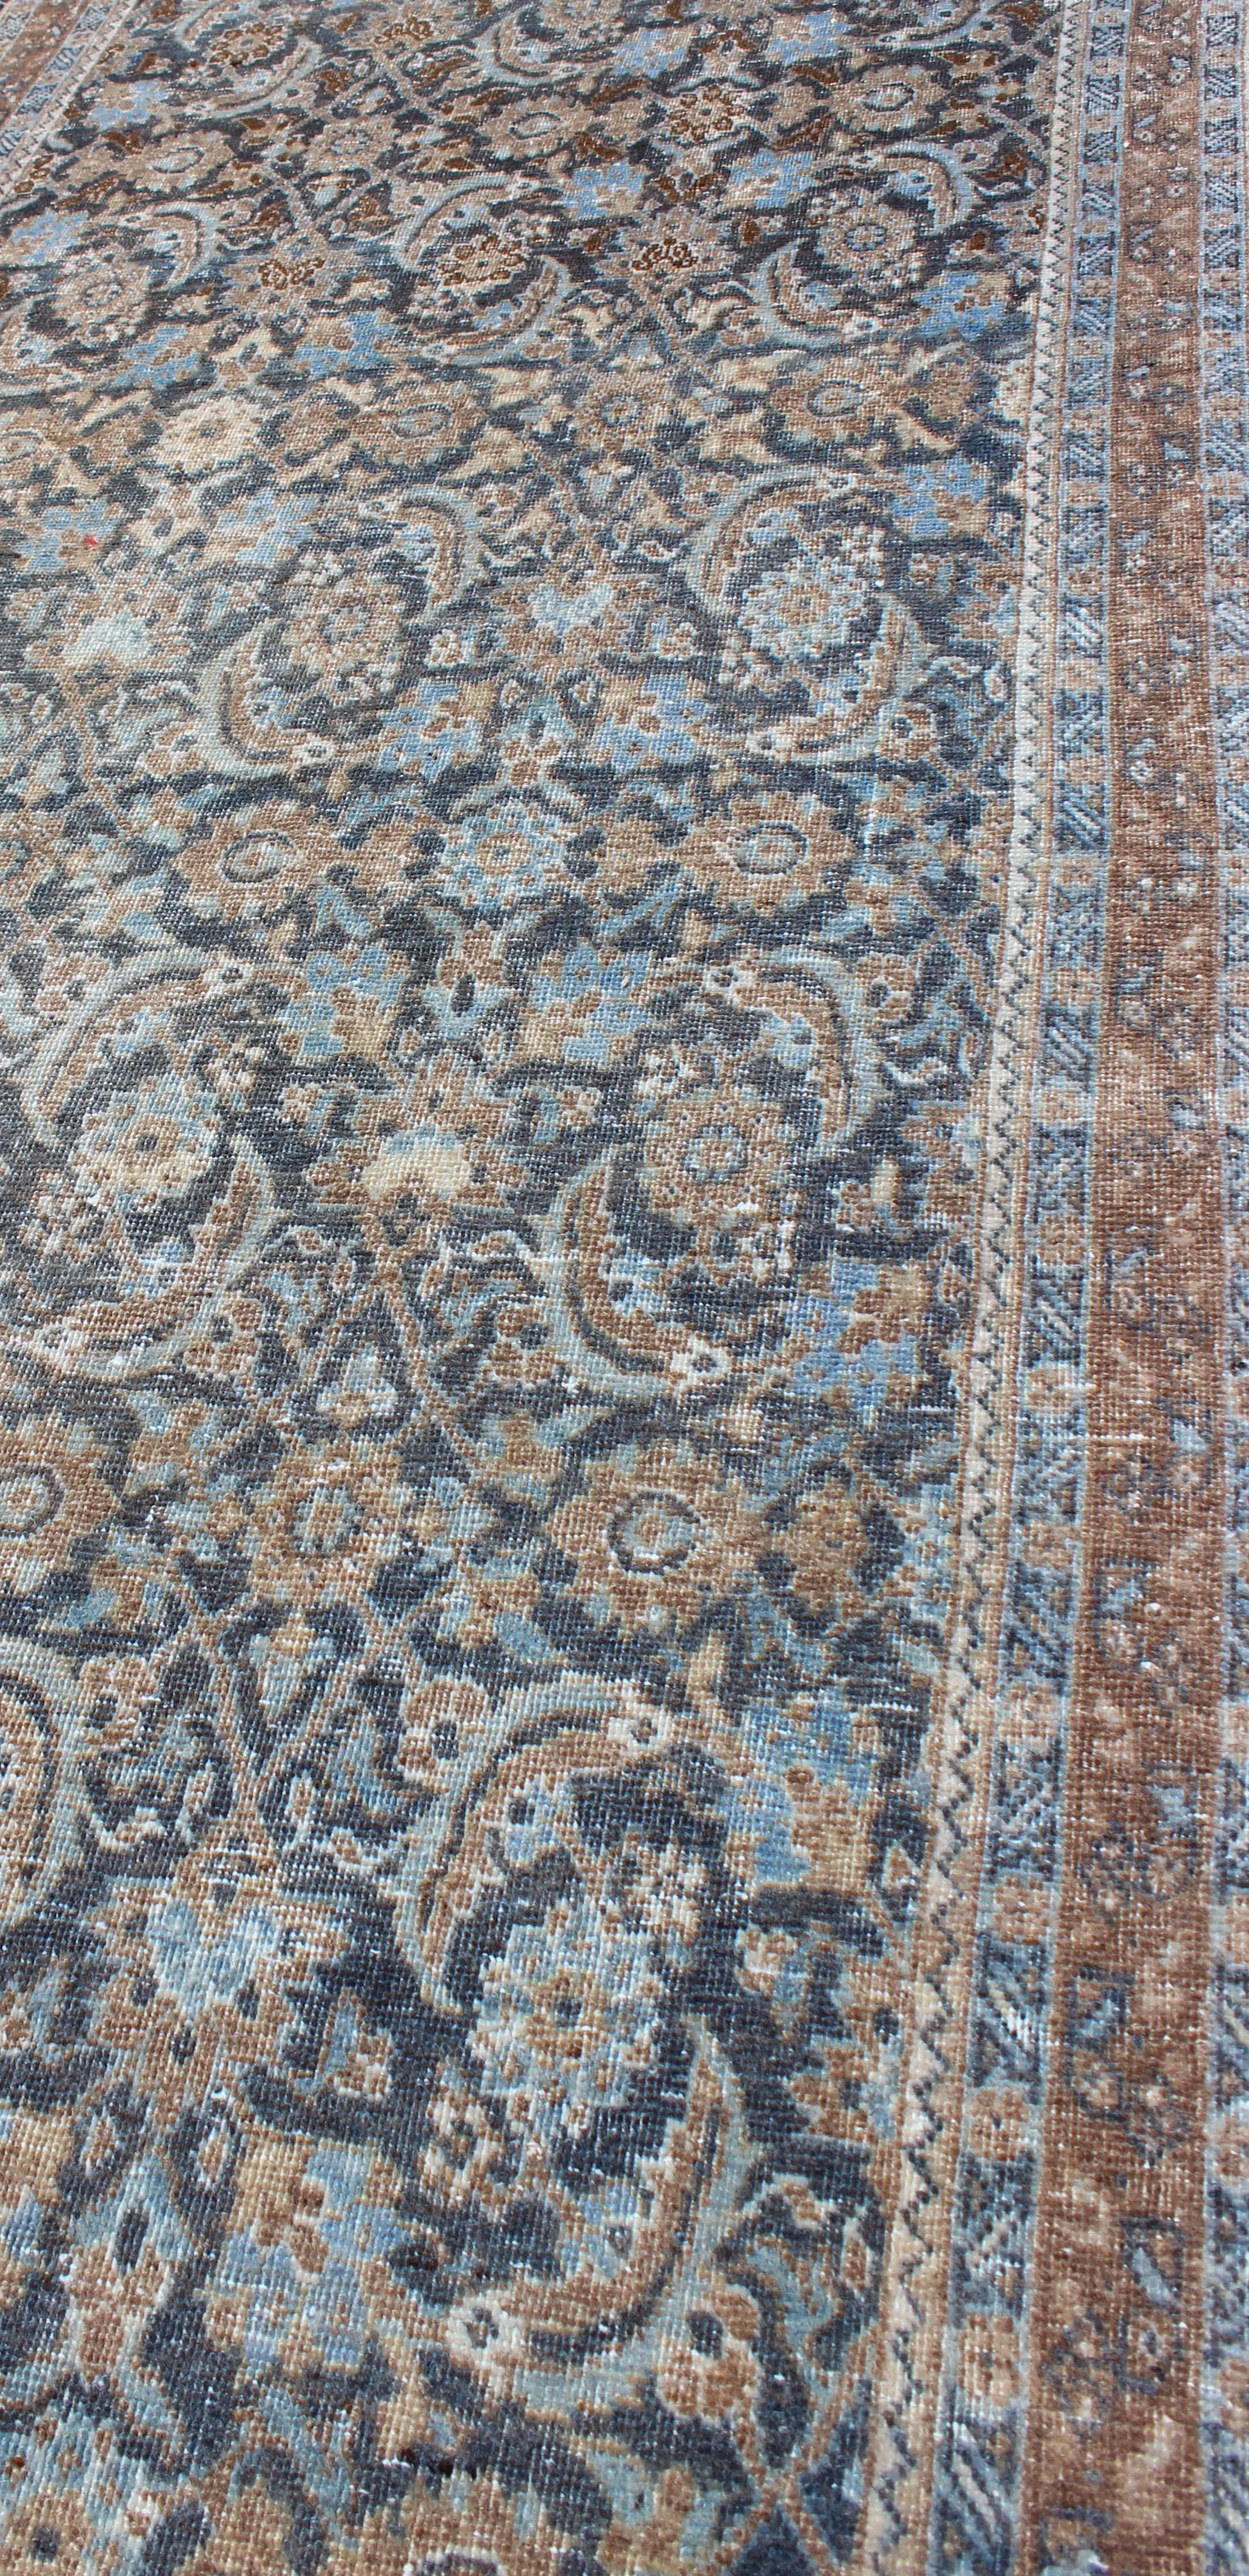 Vintage Persian Tabriz Runner with Ornate Floral Design in Blue and Taupe For Sale 4